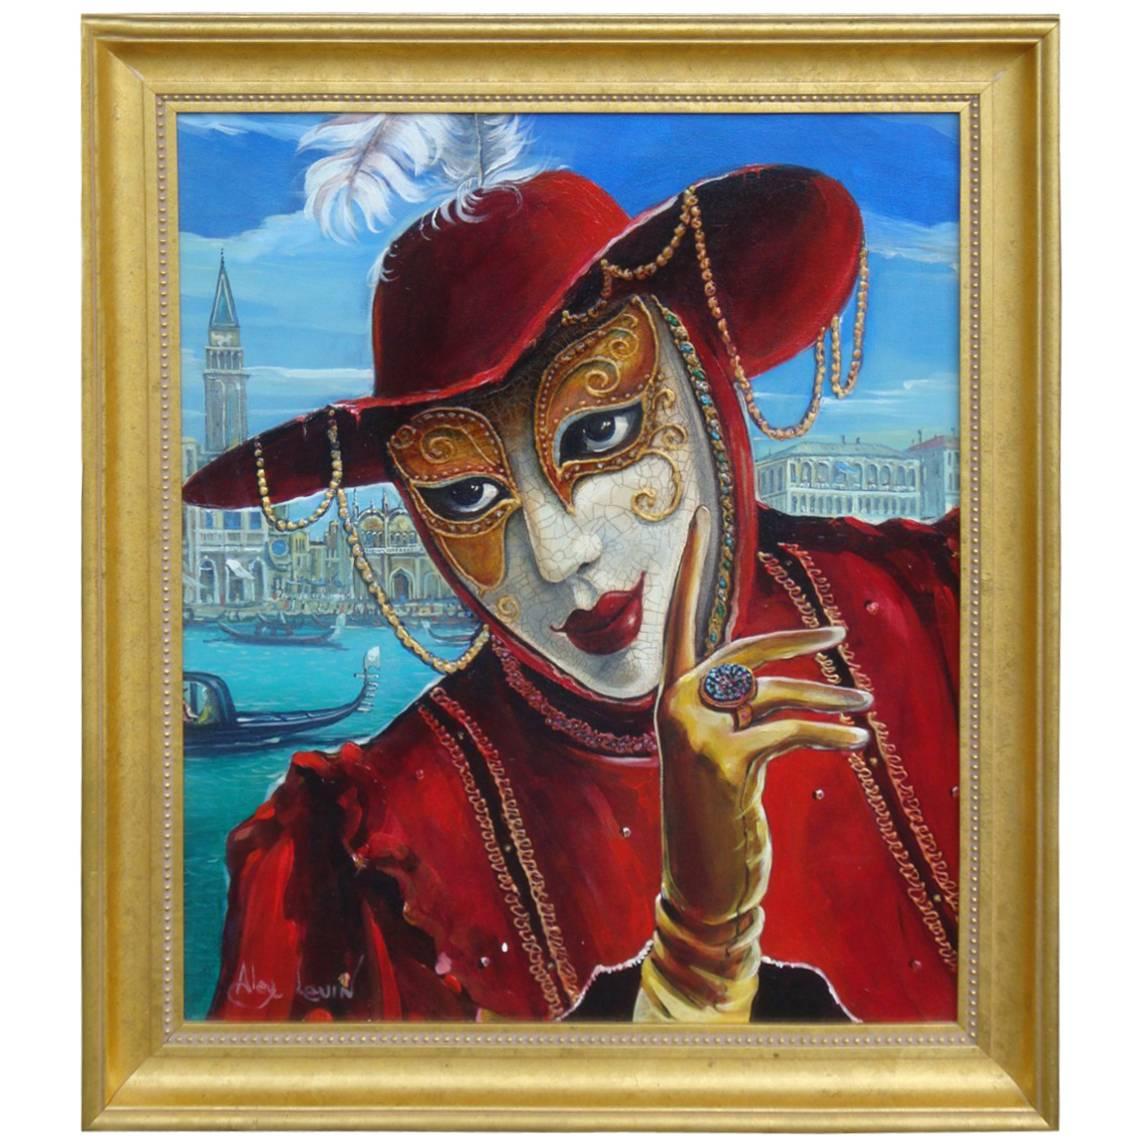 Magnificent Rare Framed Orig Alex Levin Painting "Fortune Teller", circa 2000 For Sale